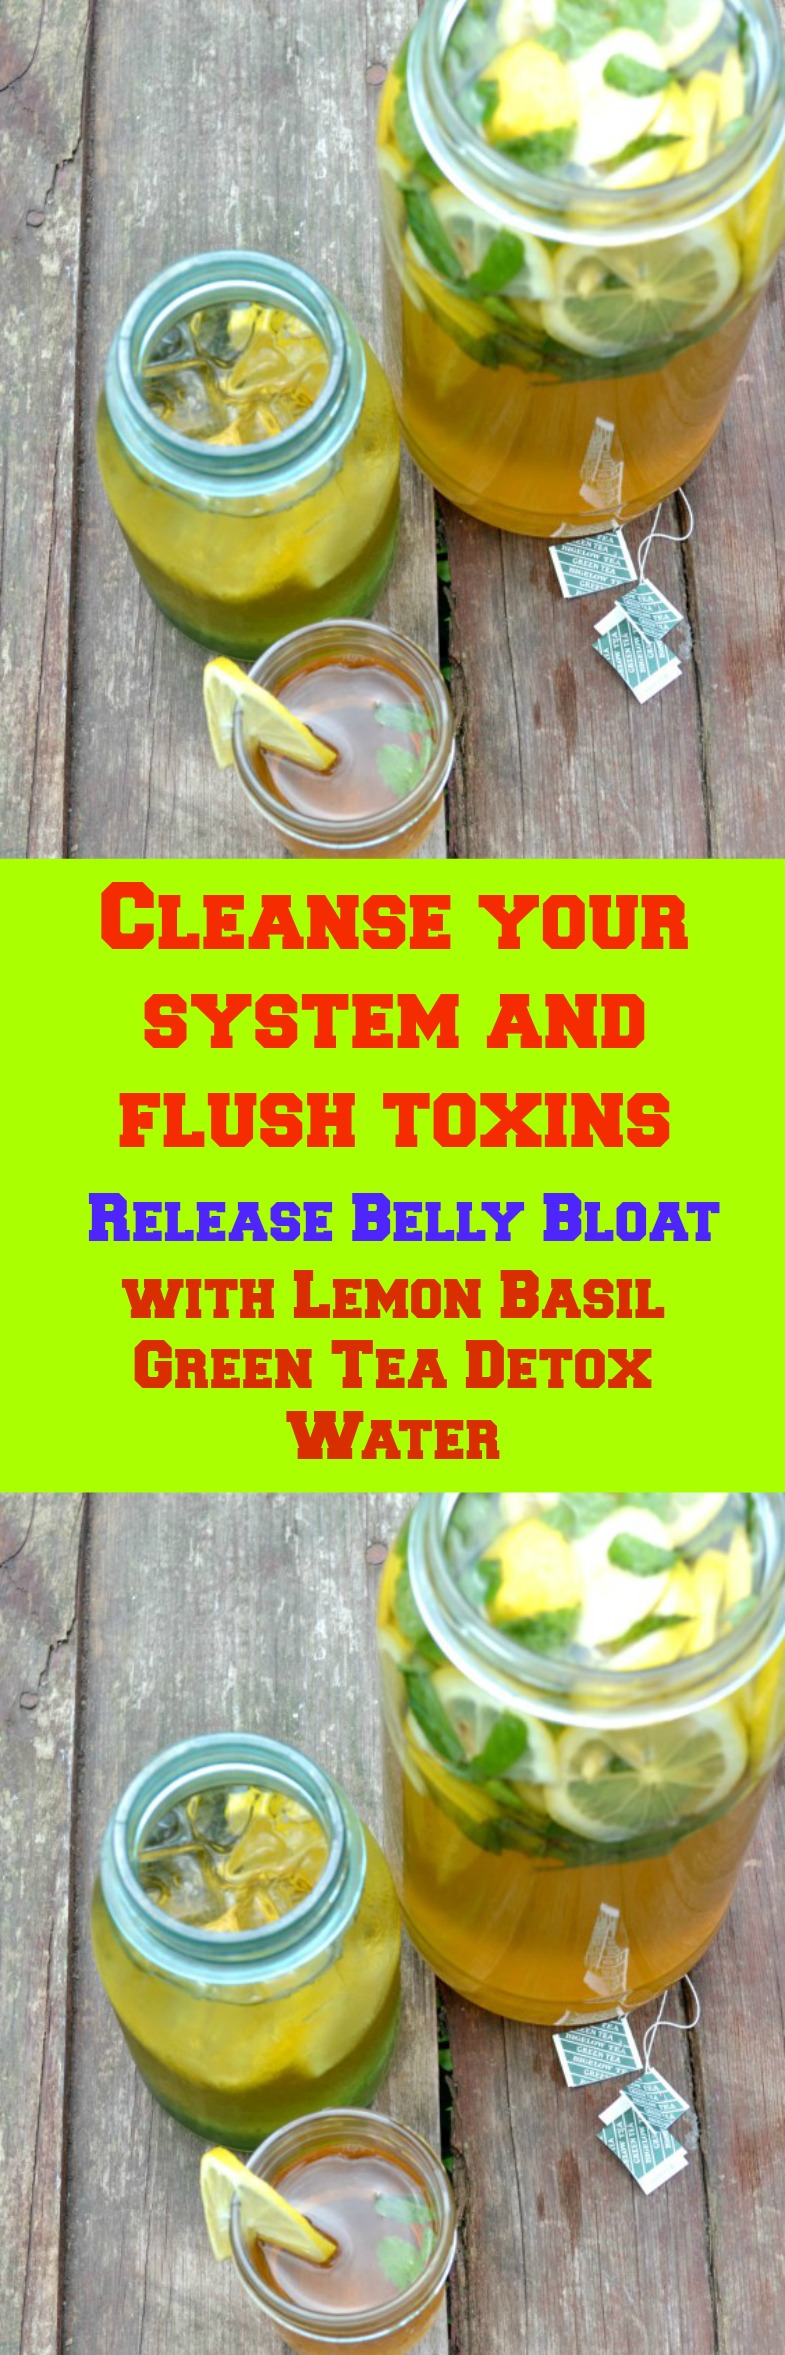 To cleanse your system and flush toxins try <strong>Lemon Basil Green Tea Detox Water</strong>. Drink this for three days to banish belly bloat and gain more energy.<br /> 